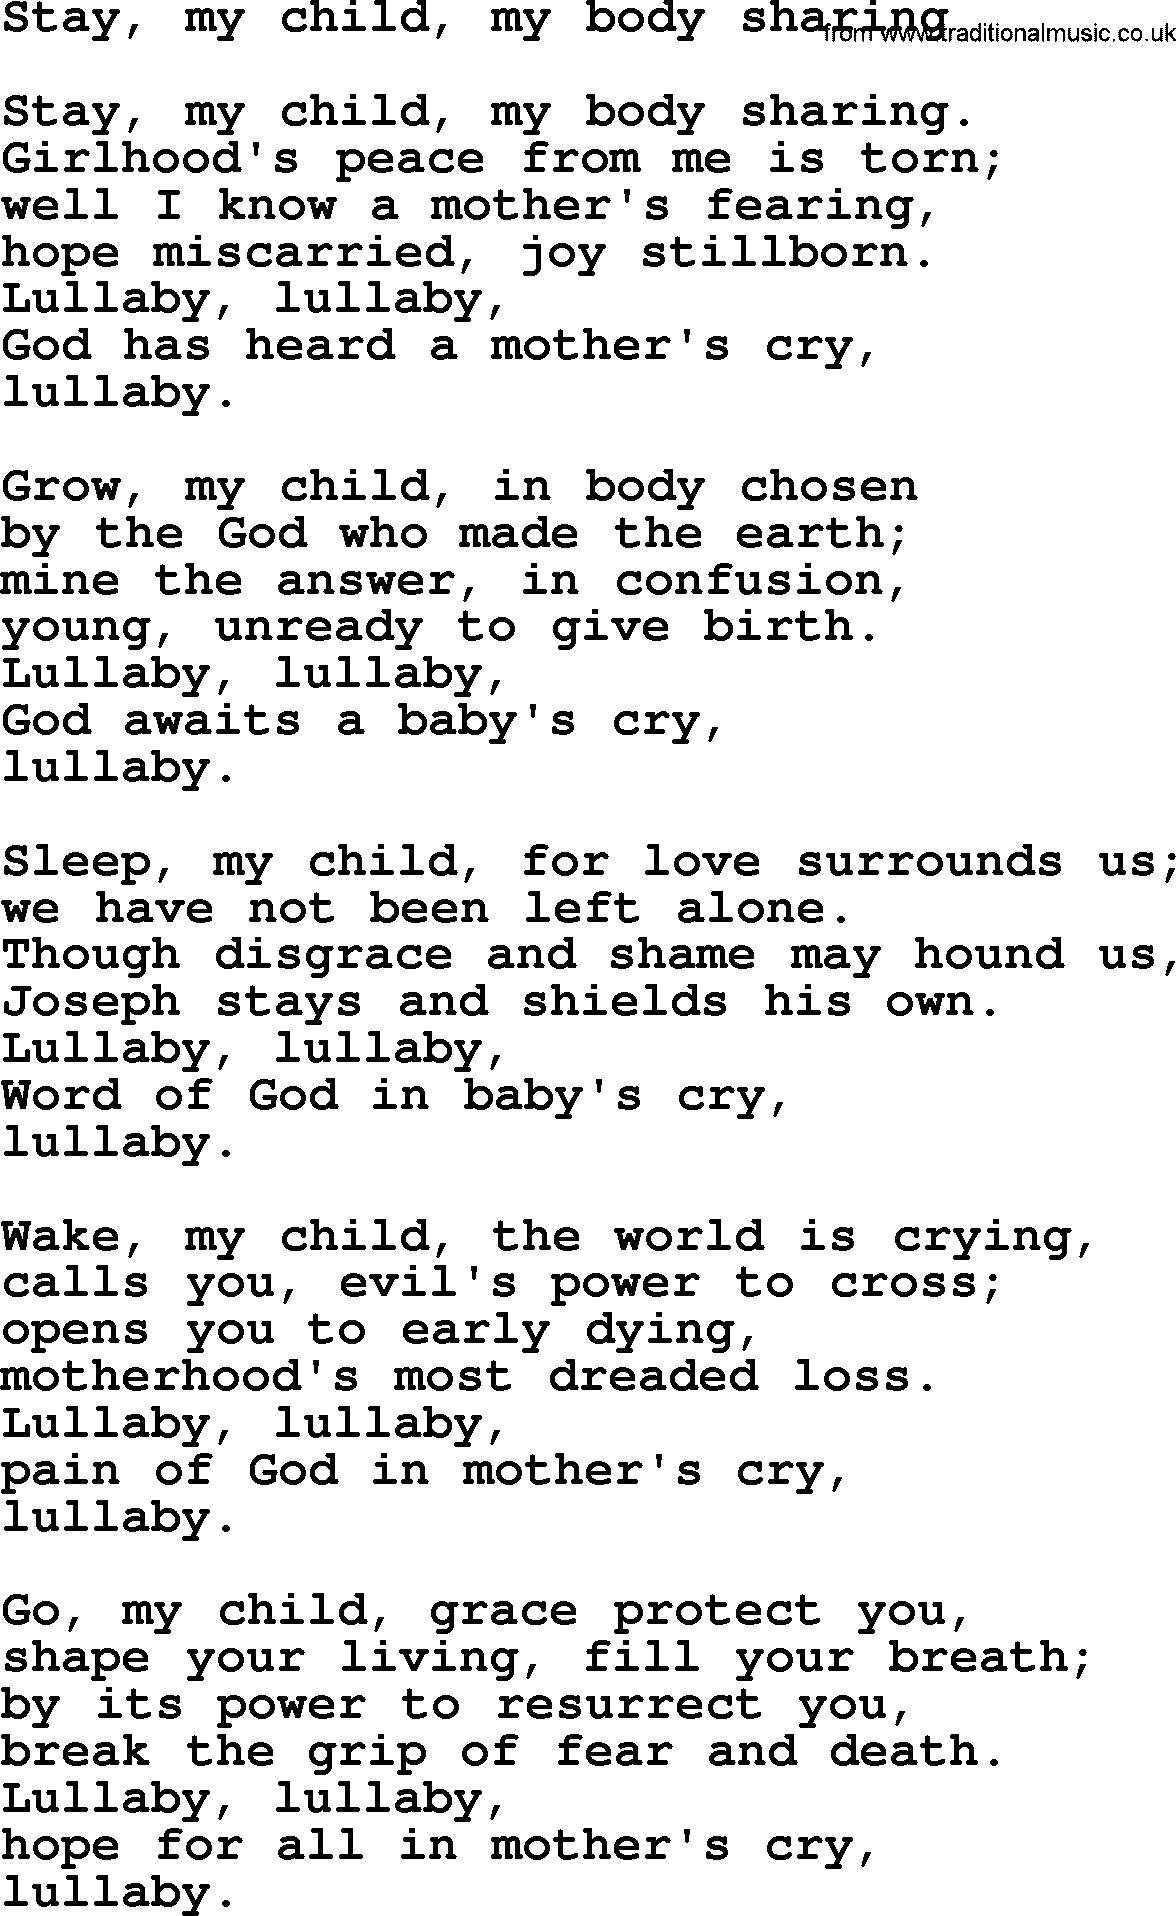 Christmas Hymns, Carols and Songs, title: Stay, My Child, My Body Sharing, lyrics with PDF